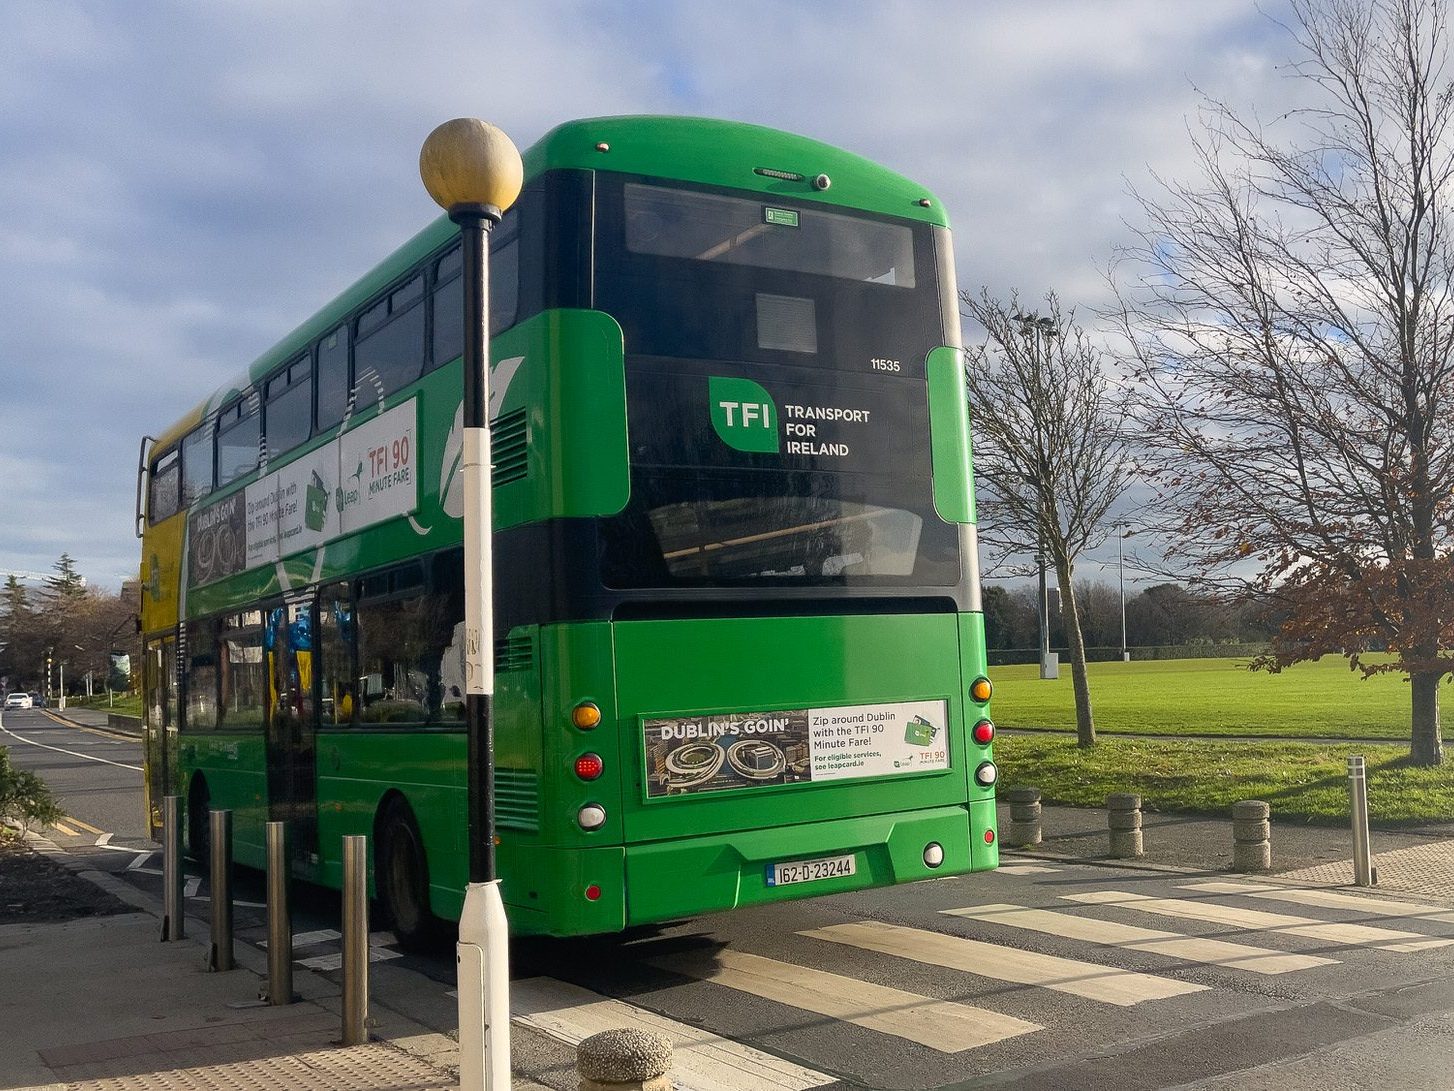 MY FIRST DAY WITHOUT THE 17 BUS SERVICE [WALK FROM S4 BUS STOP IN UCD TO ROEBUCK ROAD]-225560-1